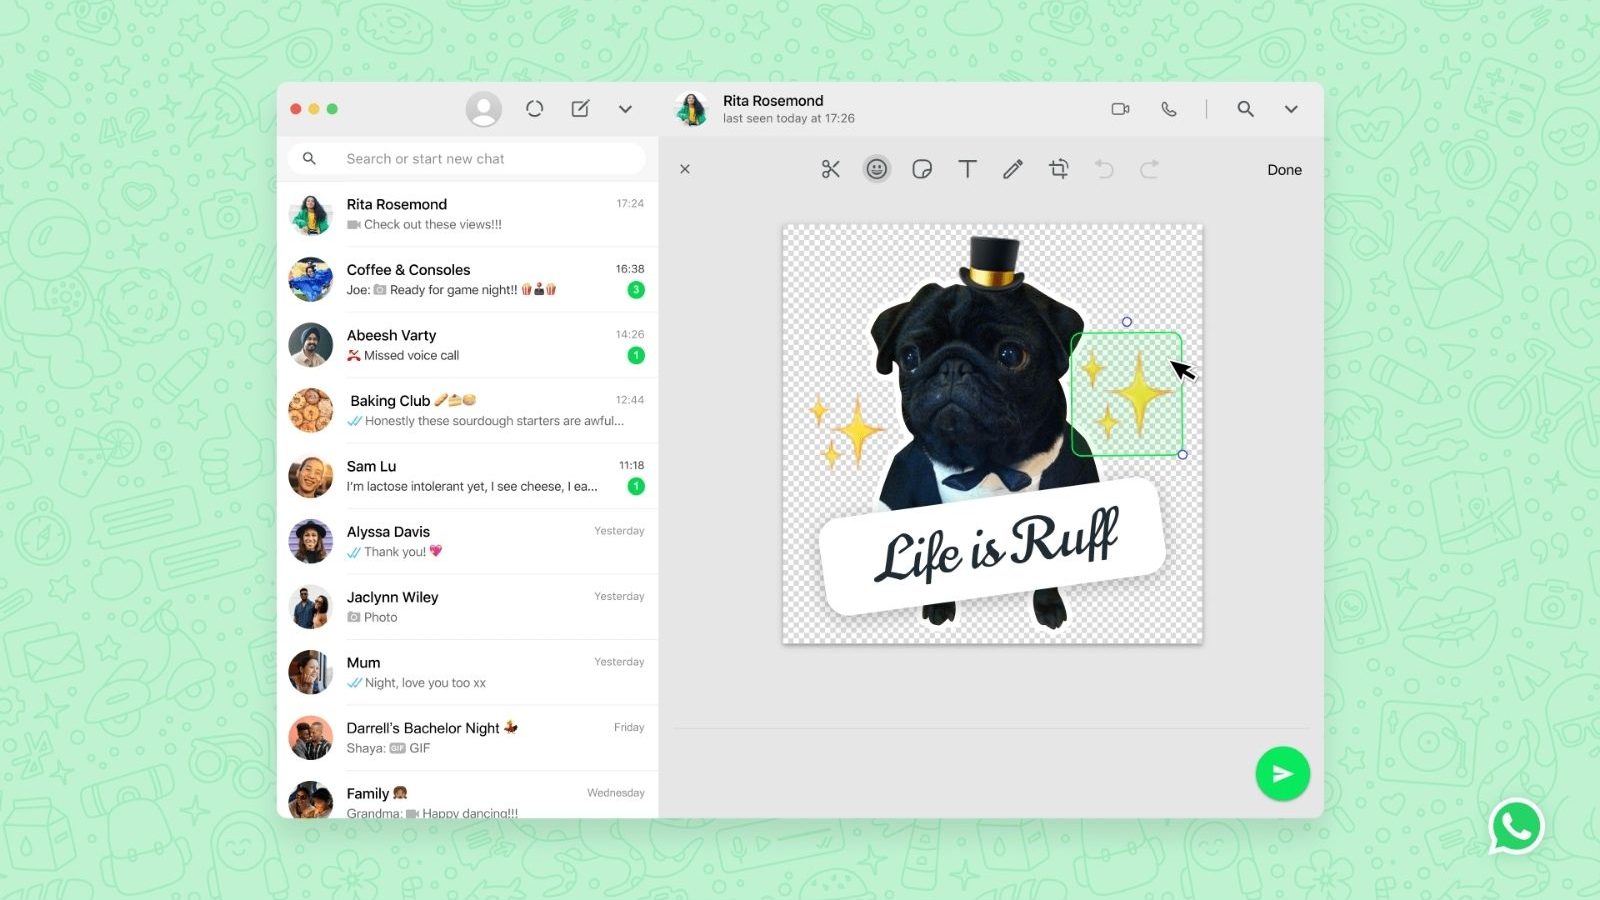 tint Concurreren erts How To Create Your Own Sticker On WhatsApp Web With This New Feature